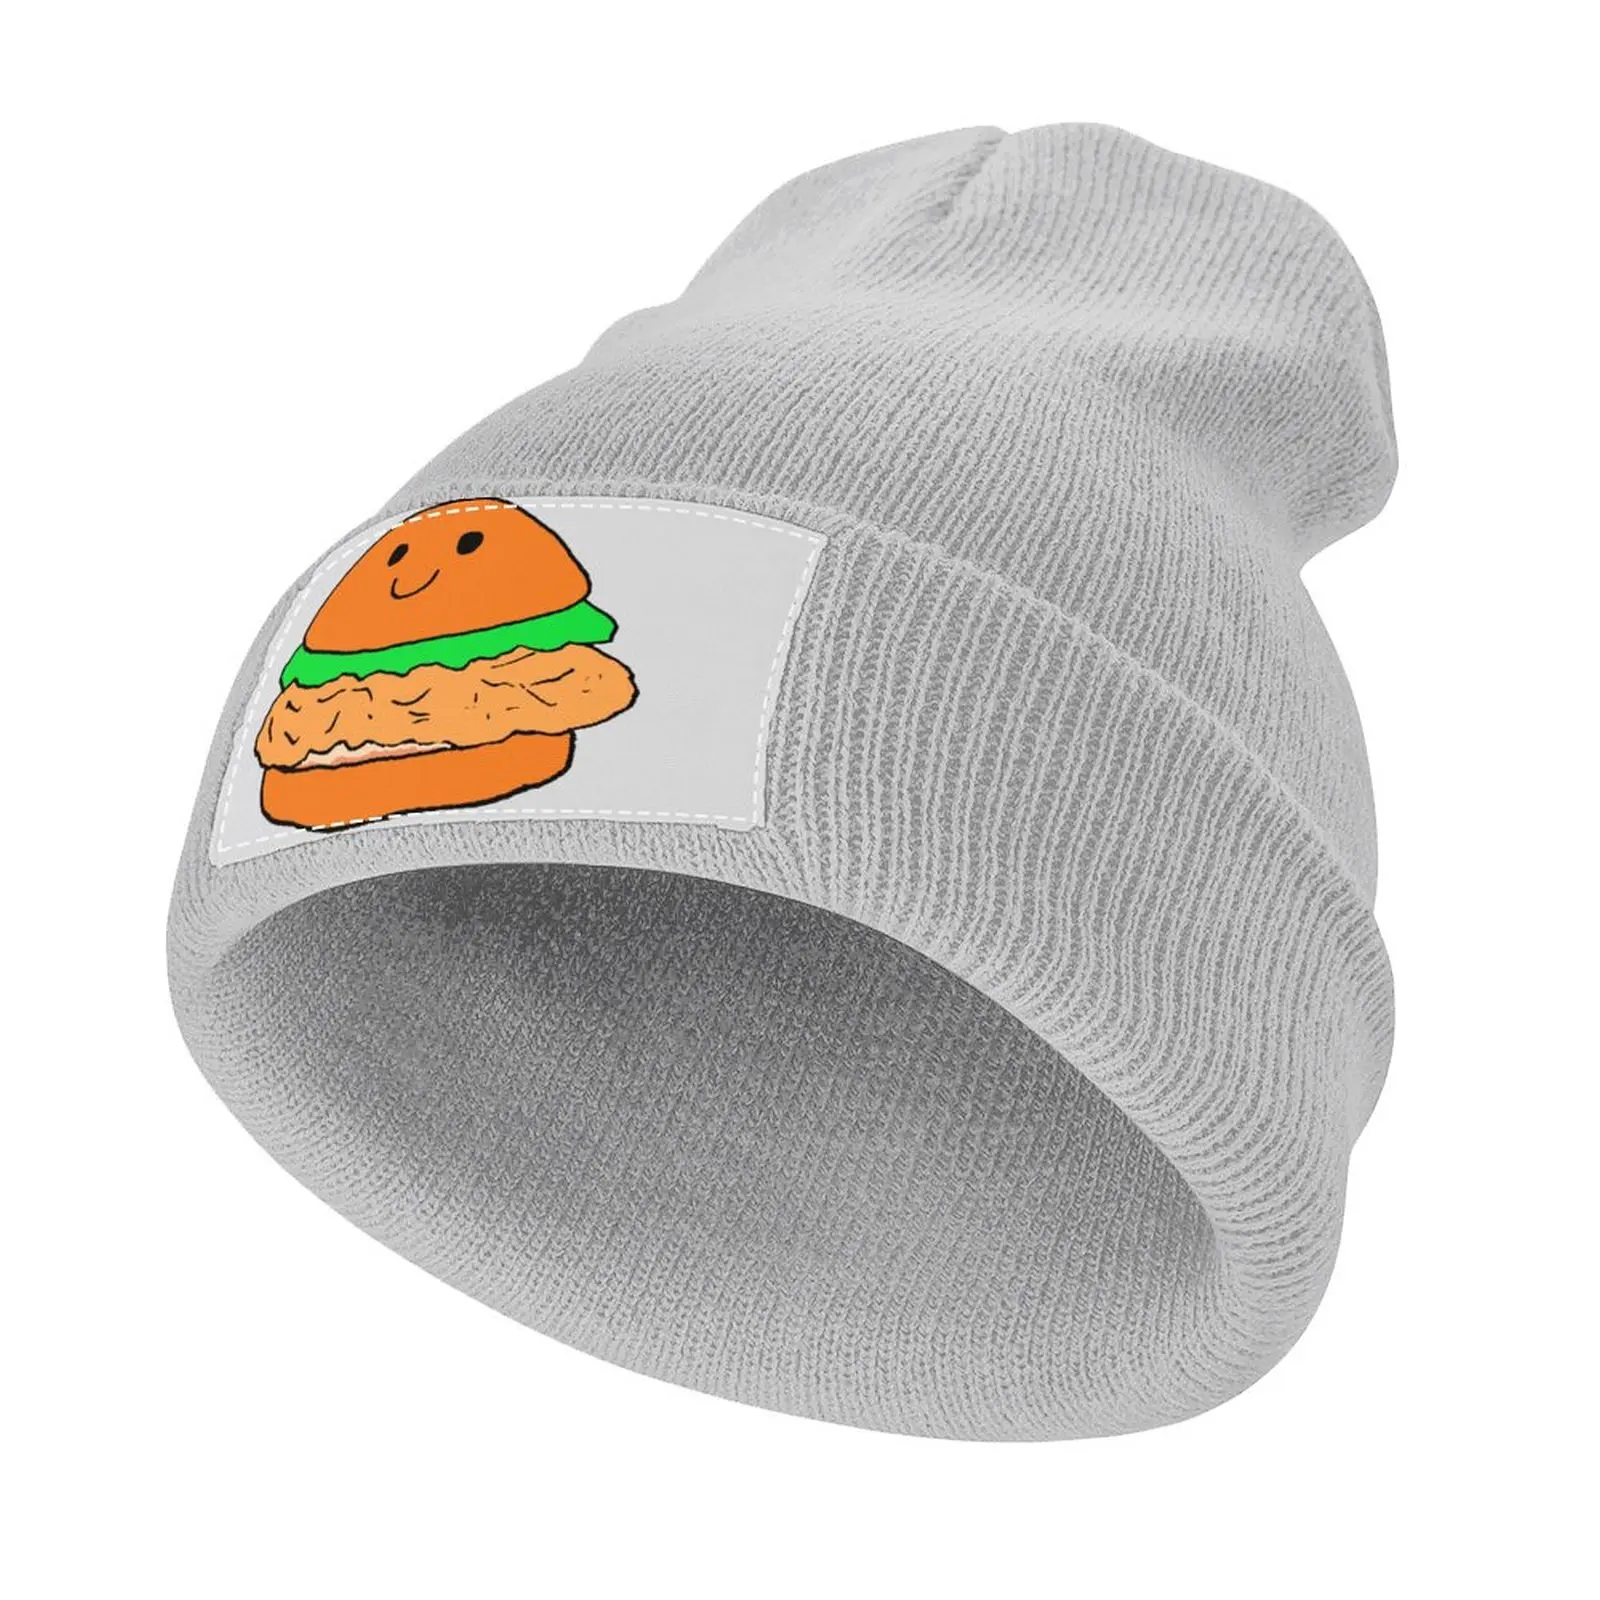 

Fried Chicken Sandwich Knitted Hat Male Uv Protection Solar Hat Anime Beach Outing Baseball Cap For Men Women's